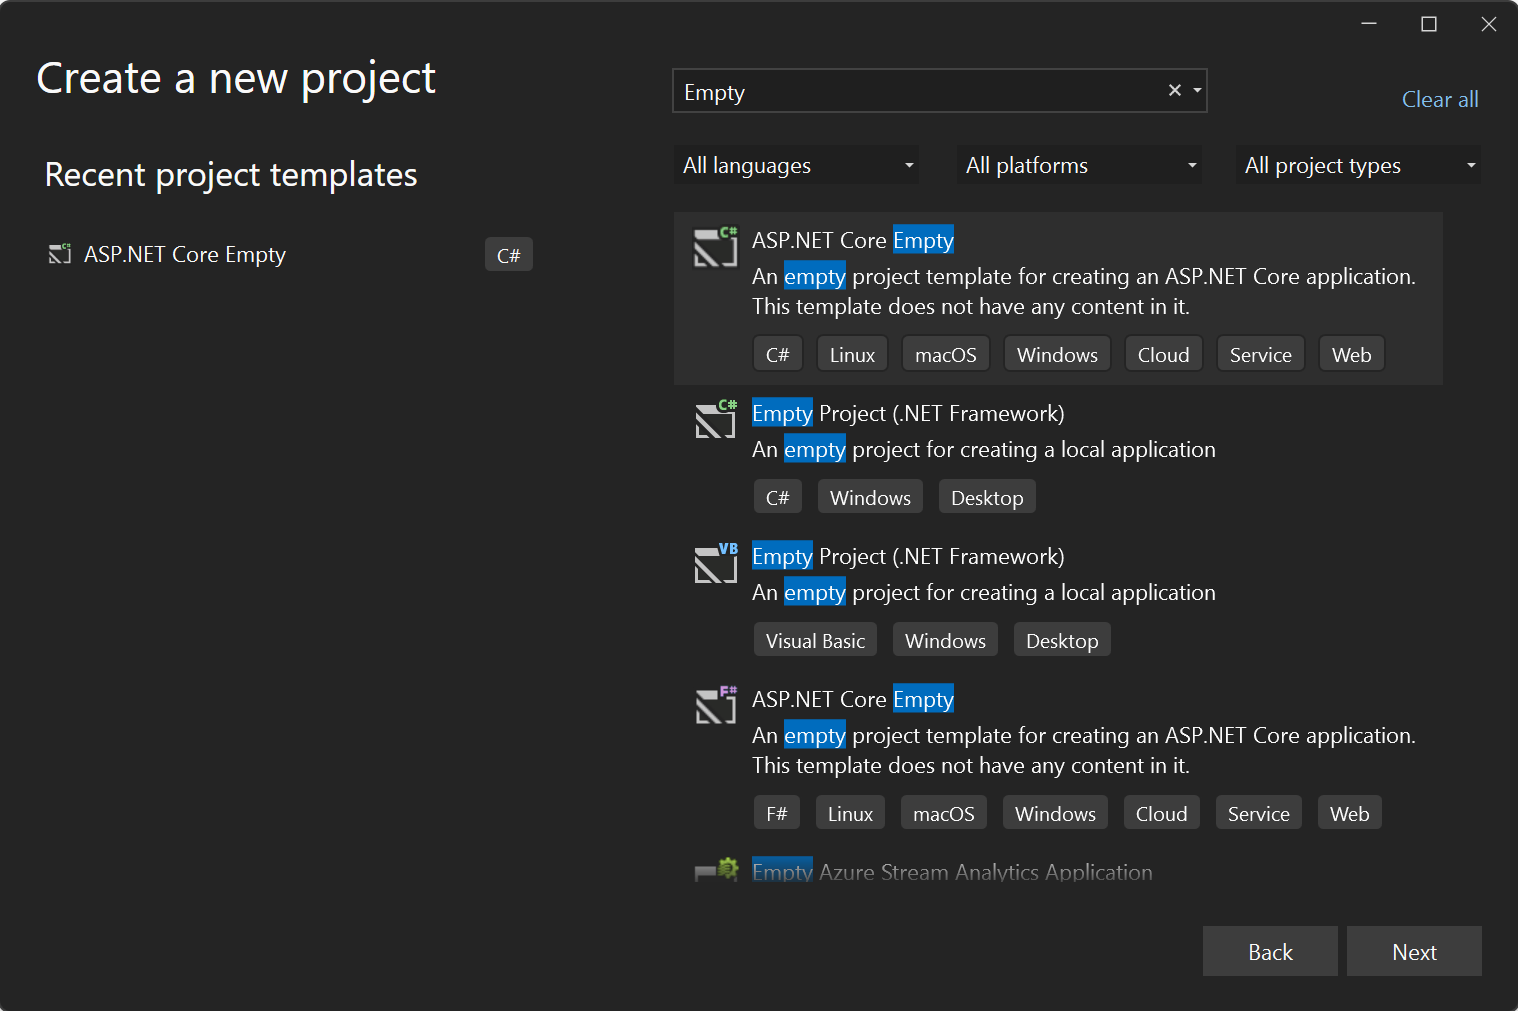 Visual Studio "Create a new project" dialog. This dial lists different project templates and the user is searching "Empty" and selected "ASP.NET Core Empty" project.